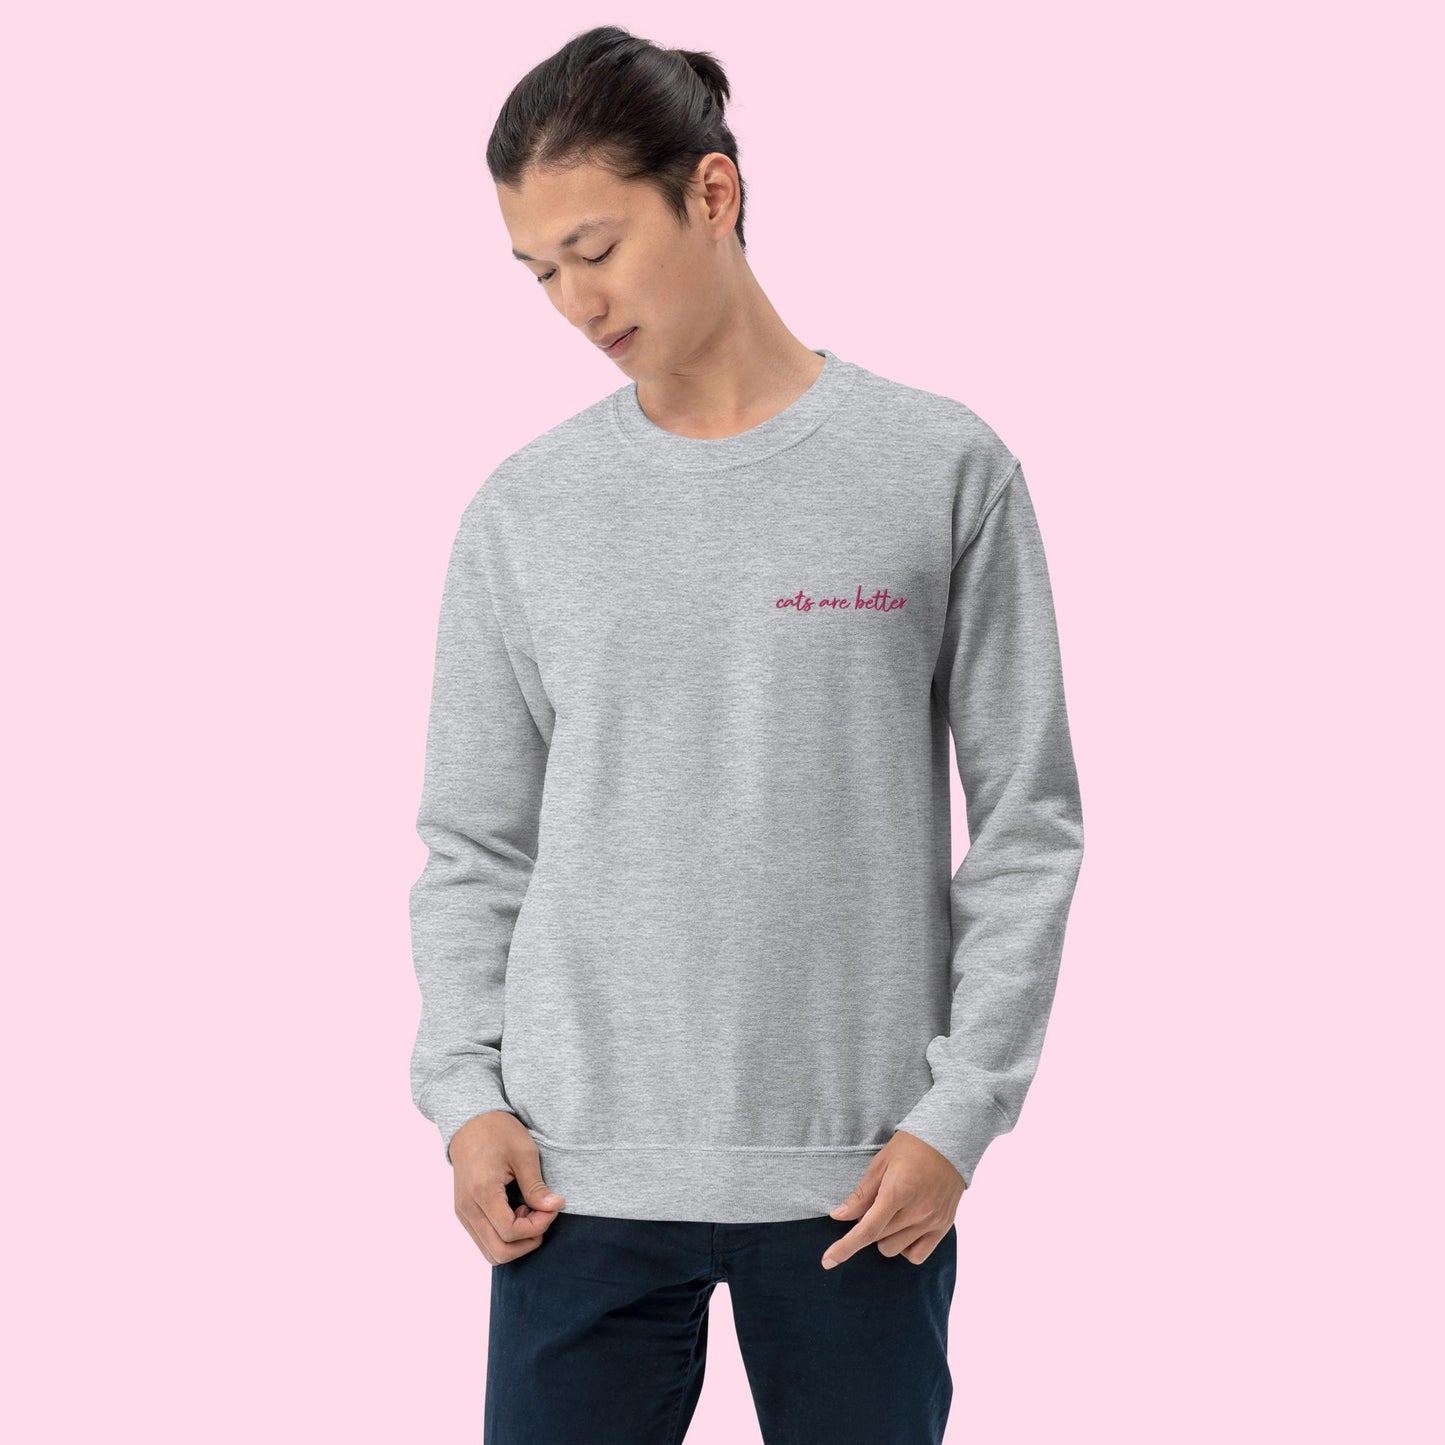 Cats are better sweatshirt - grey with pink embroidery